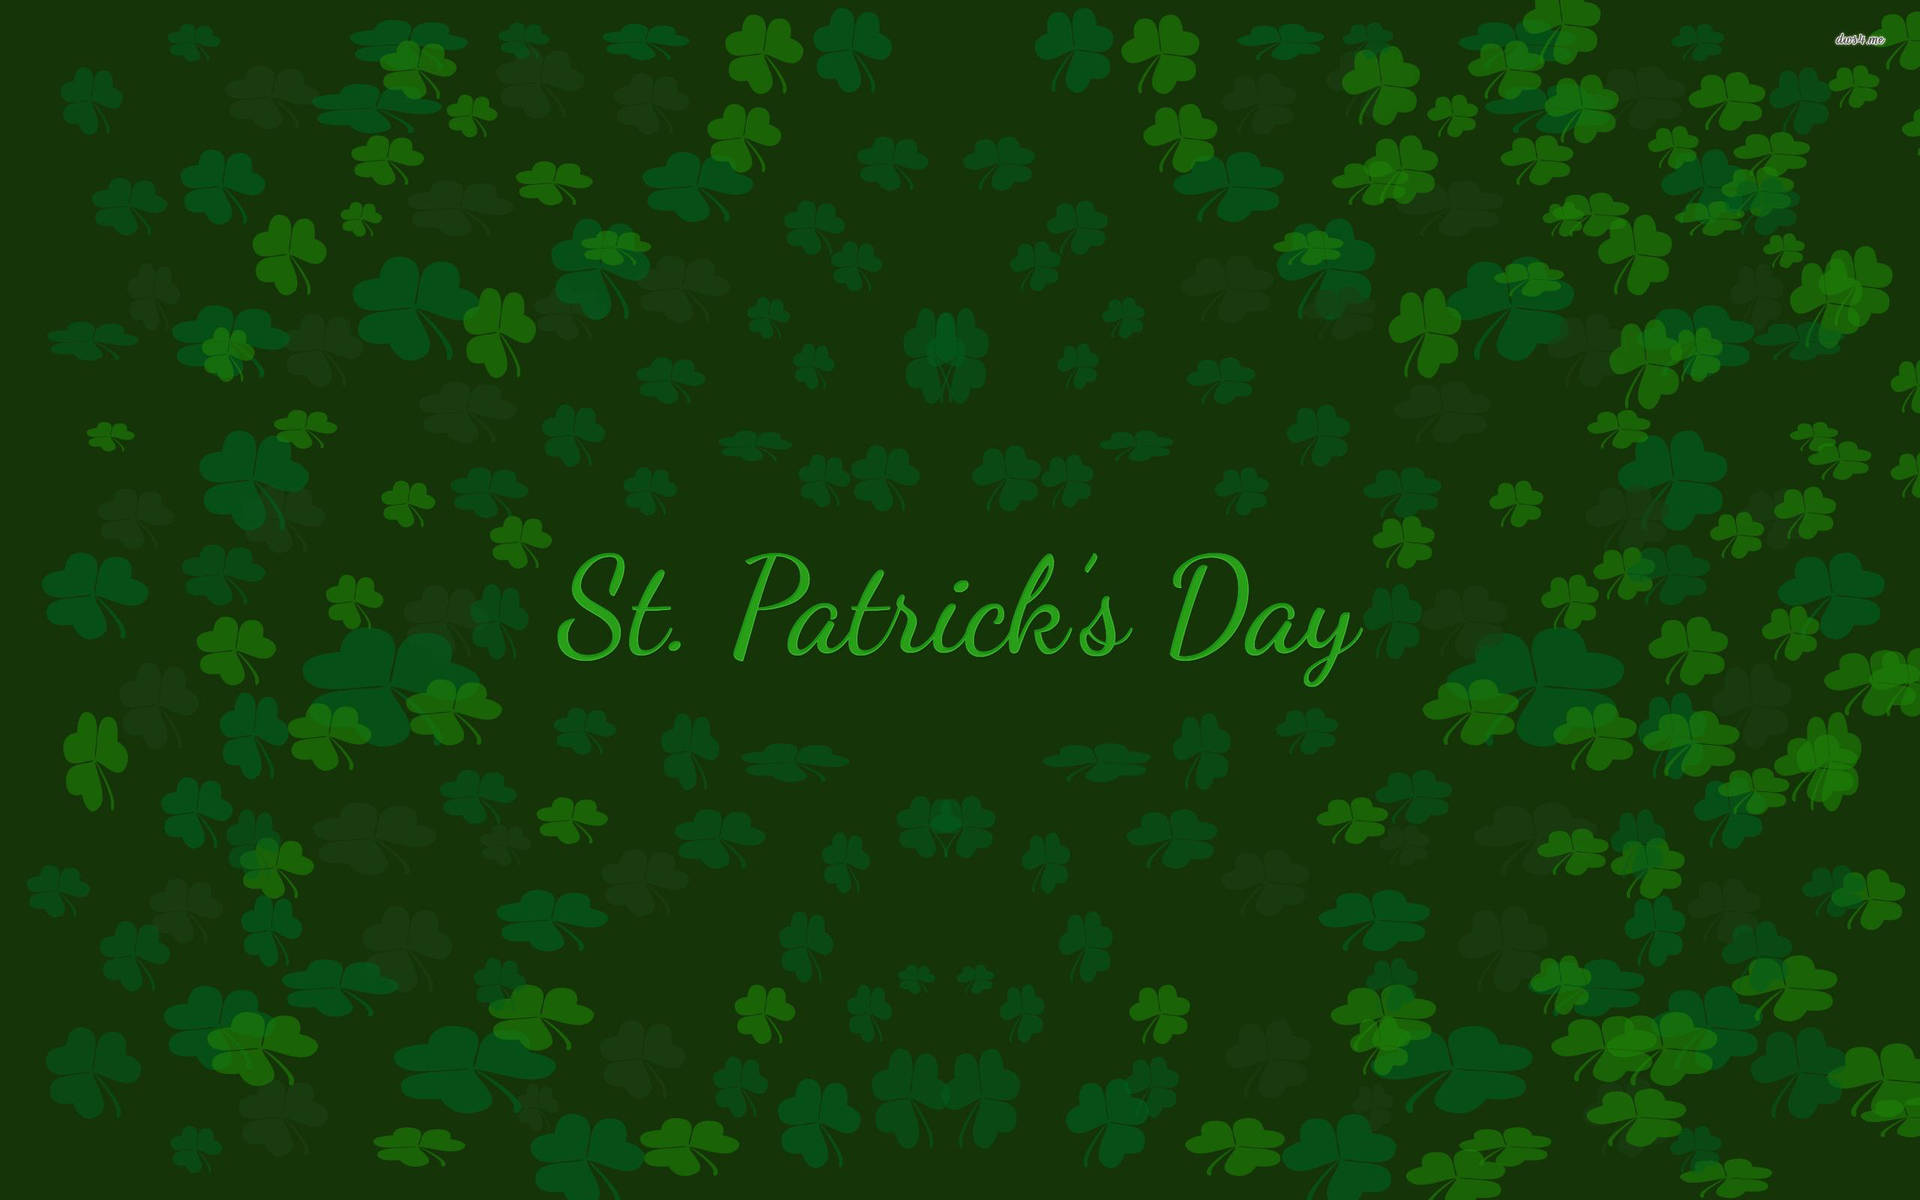 Saint Patrick’s Day Over Clover Green Background